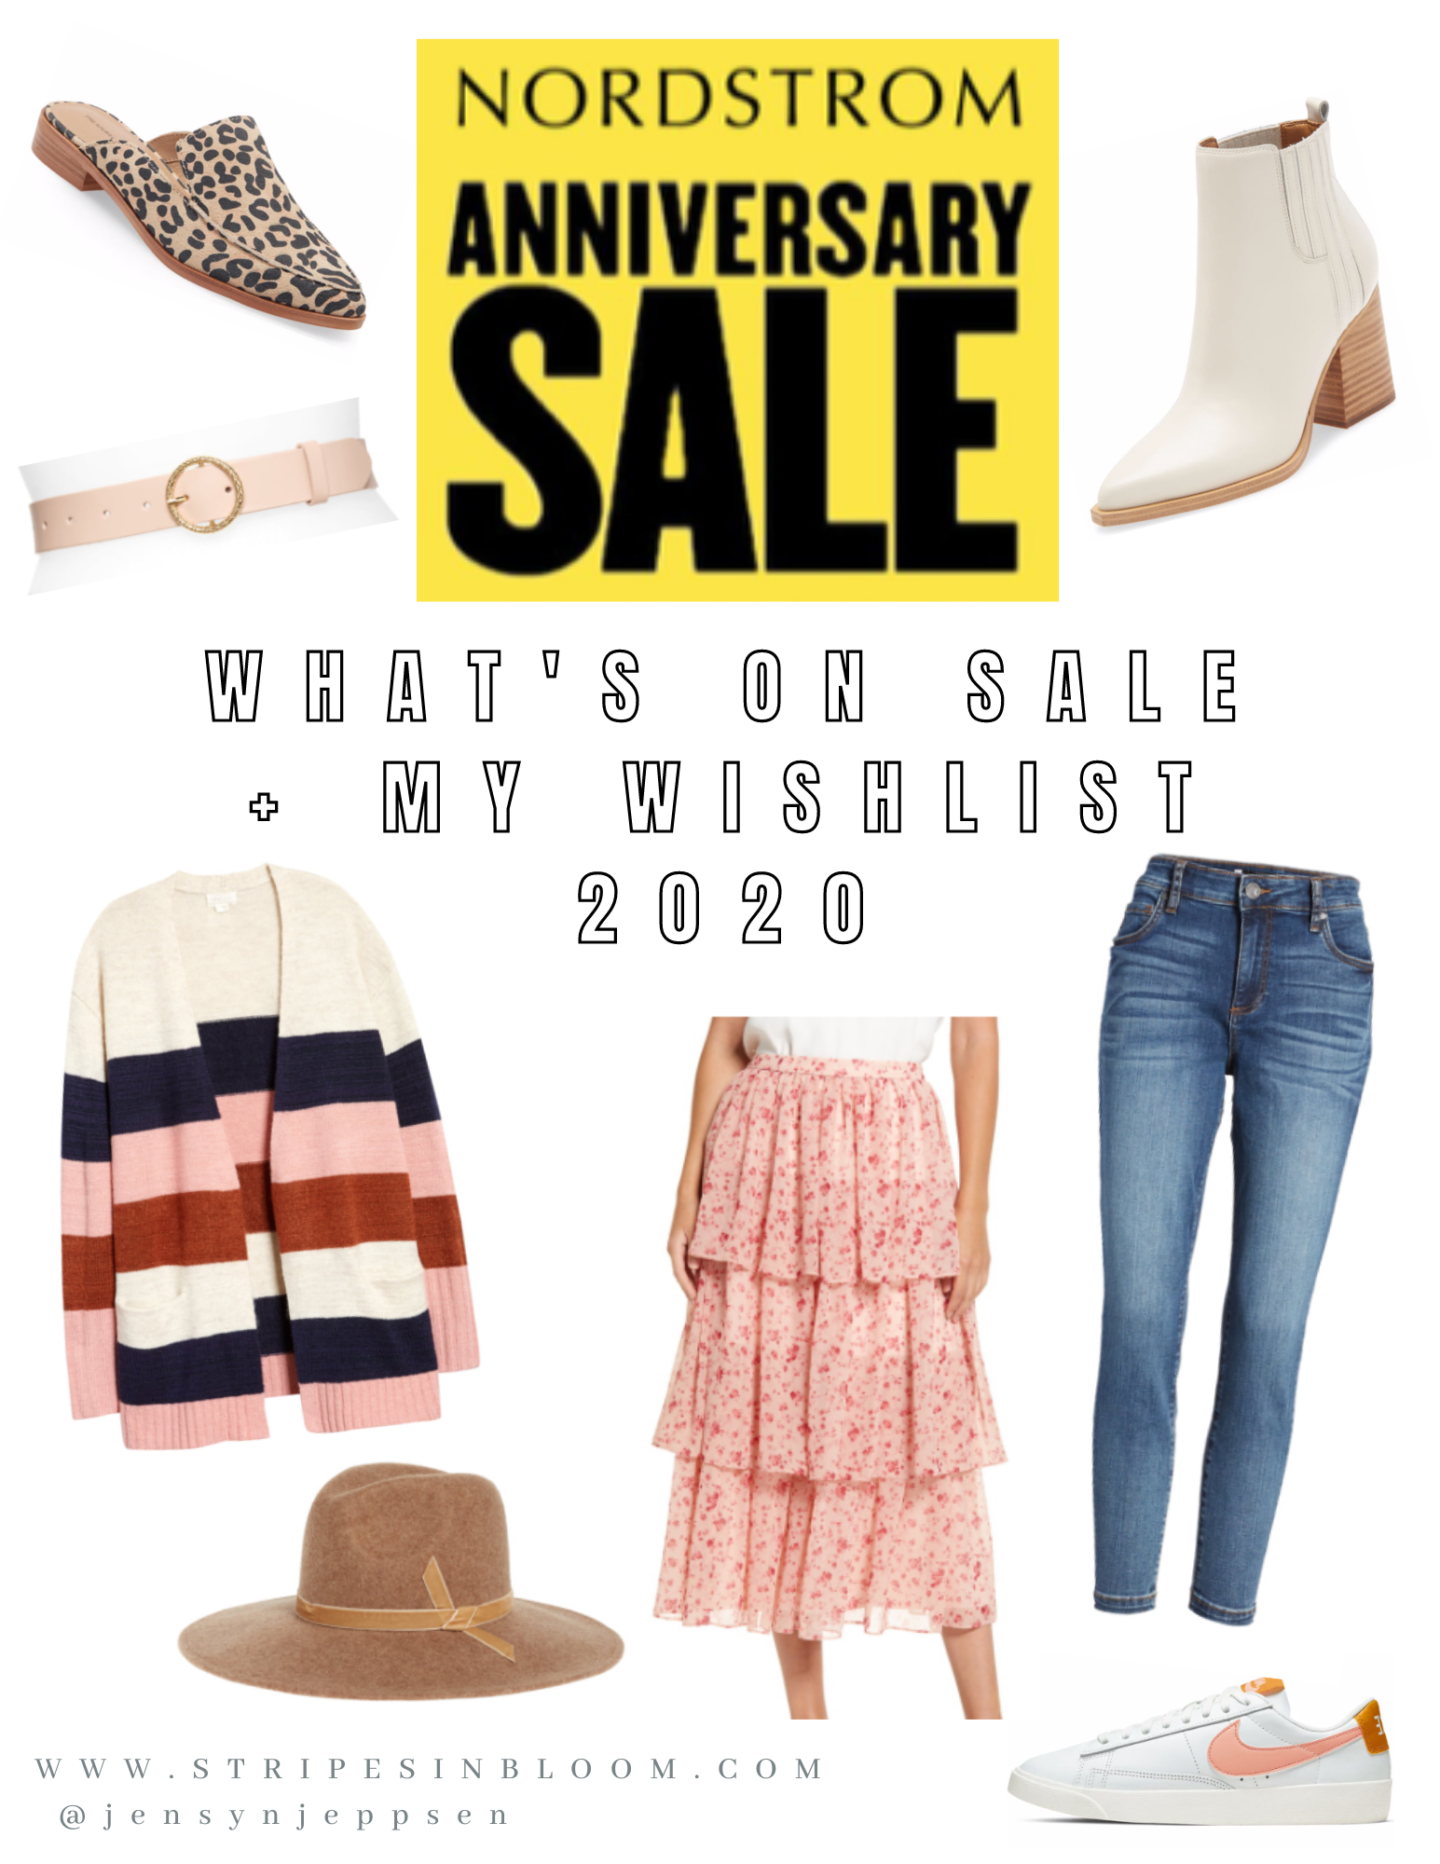 Nordstrom Anniversary Sale 2020 tips + product preview